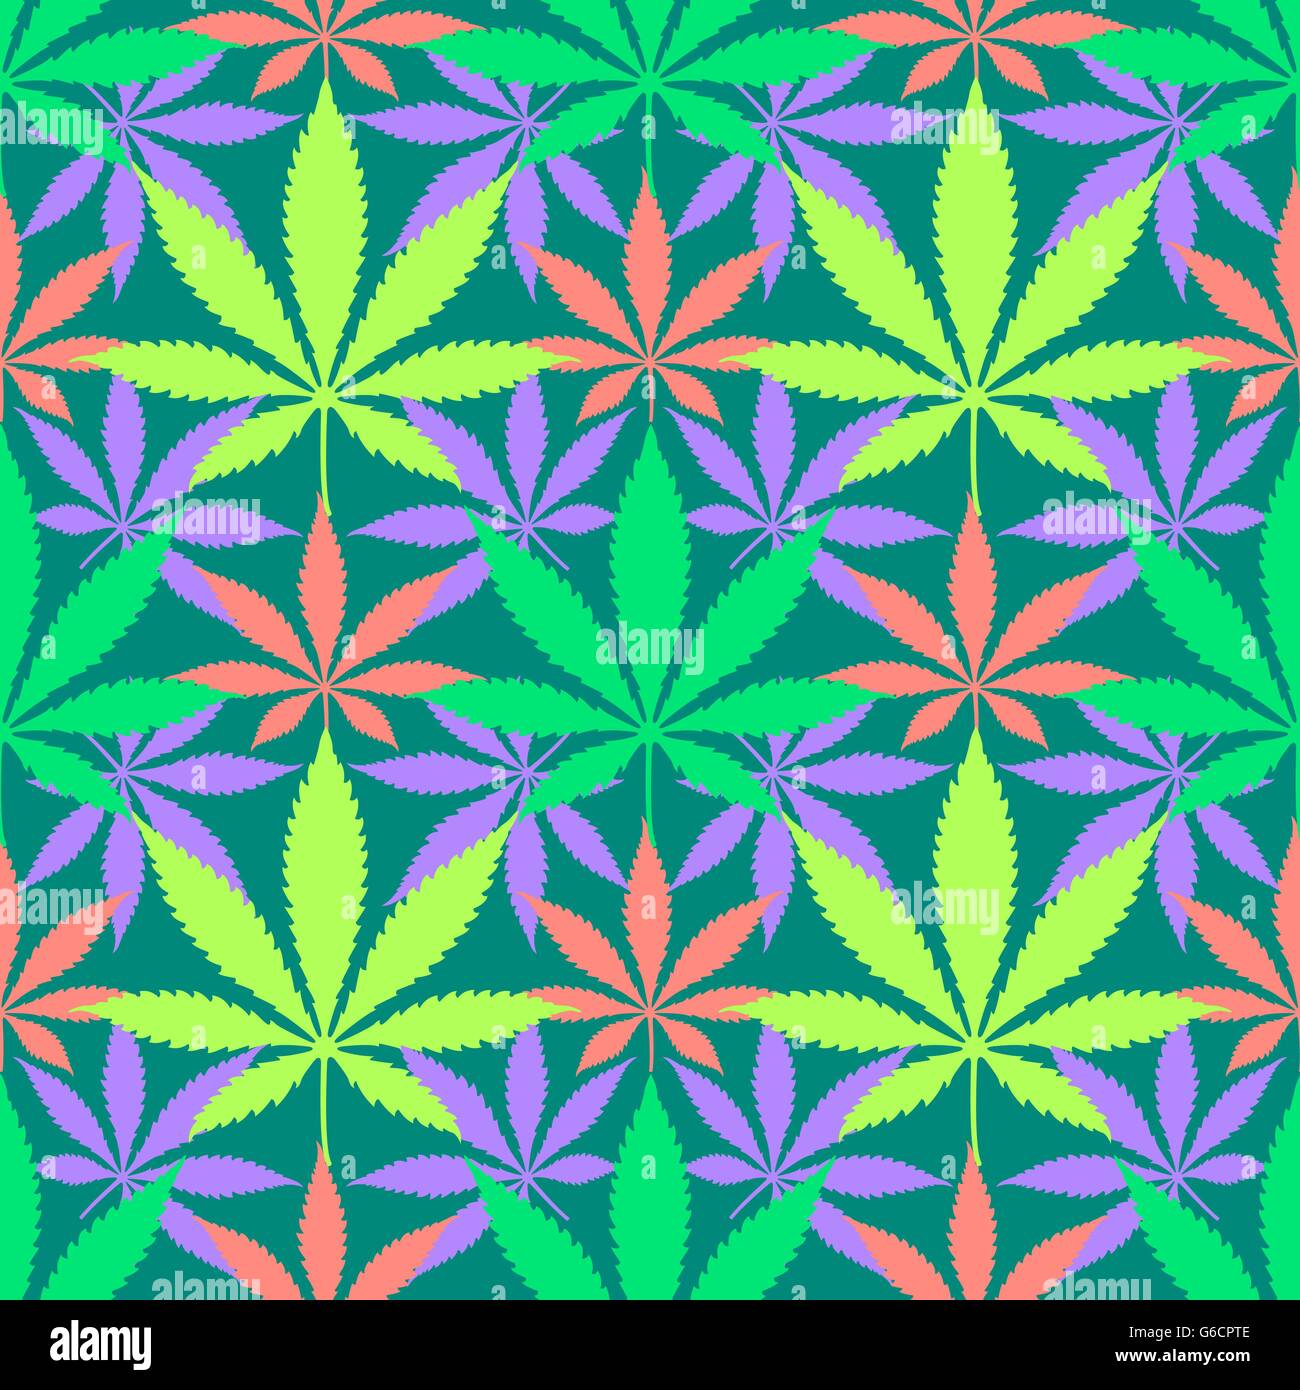 vector various colors cannabis marijuana leaves silhouettes decoration seamless pattern green background Stock Vector